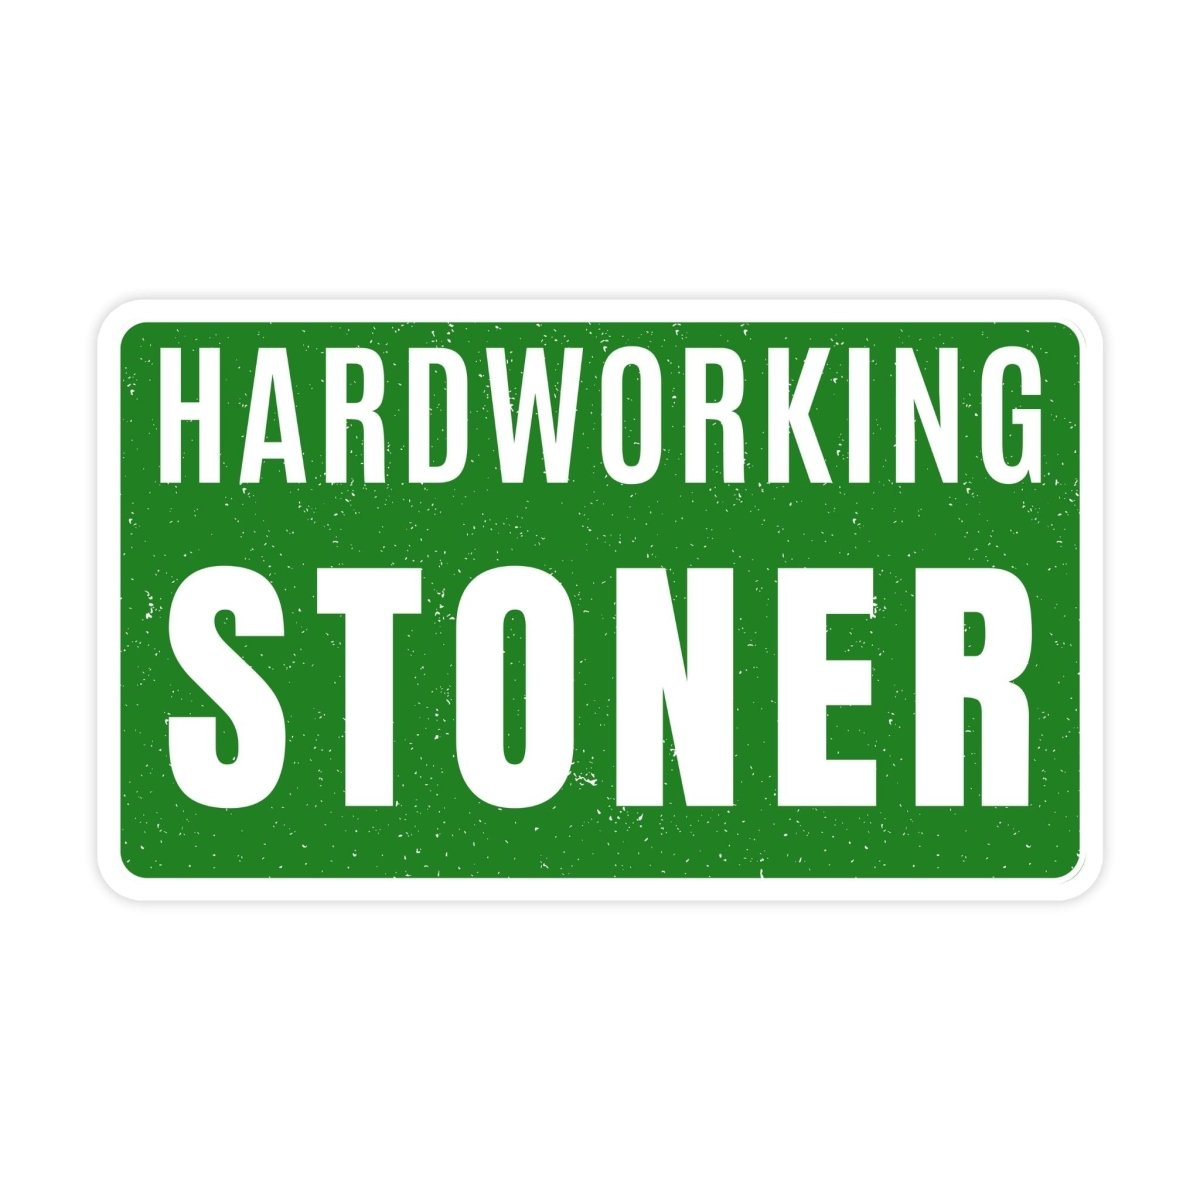 Hardworking Stoner Cannabis Weed Sticker - stickerbullHardworking Stoner Cannabis Weed StickerRetail StickerstickerbullstickerbullSage_HardworkingStoner [#250]Green bumper sticker that is a rectangle with text that reads hard working stoner